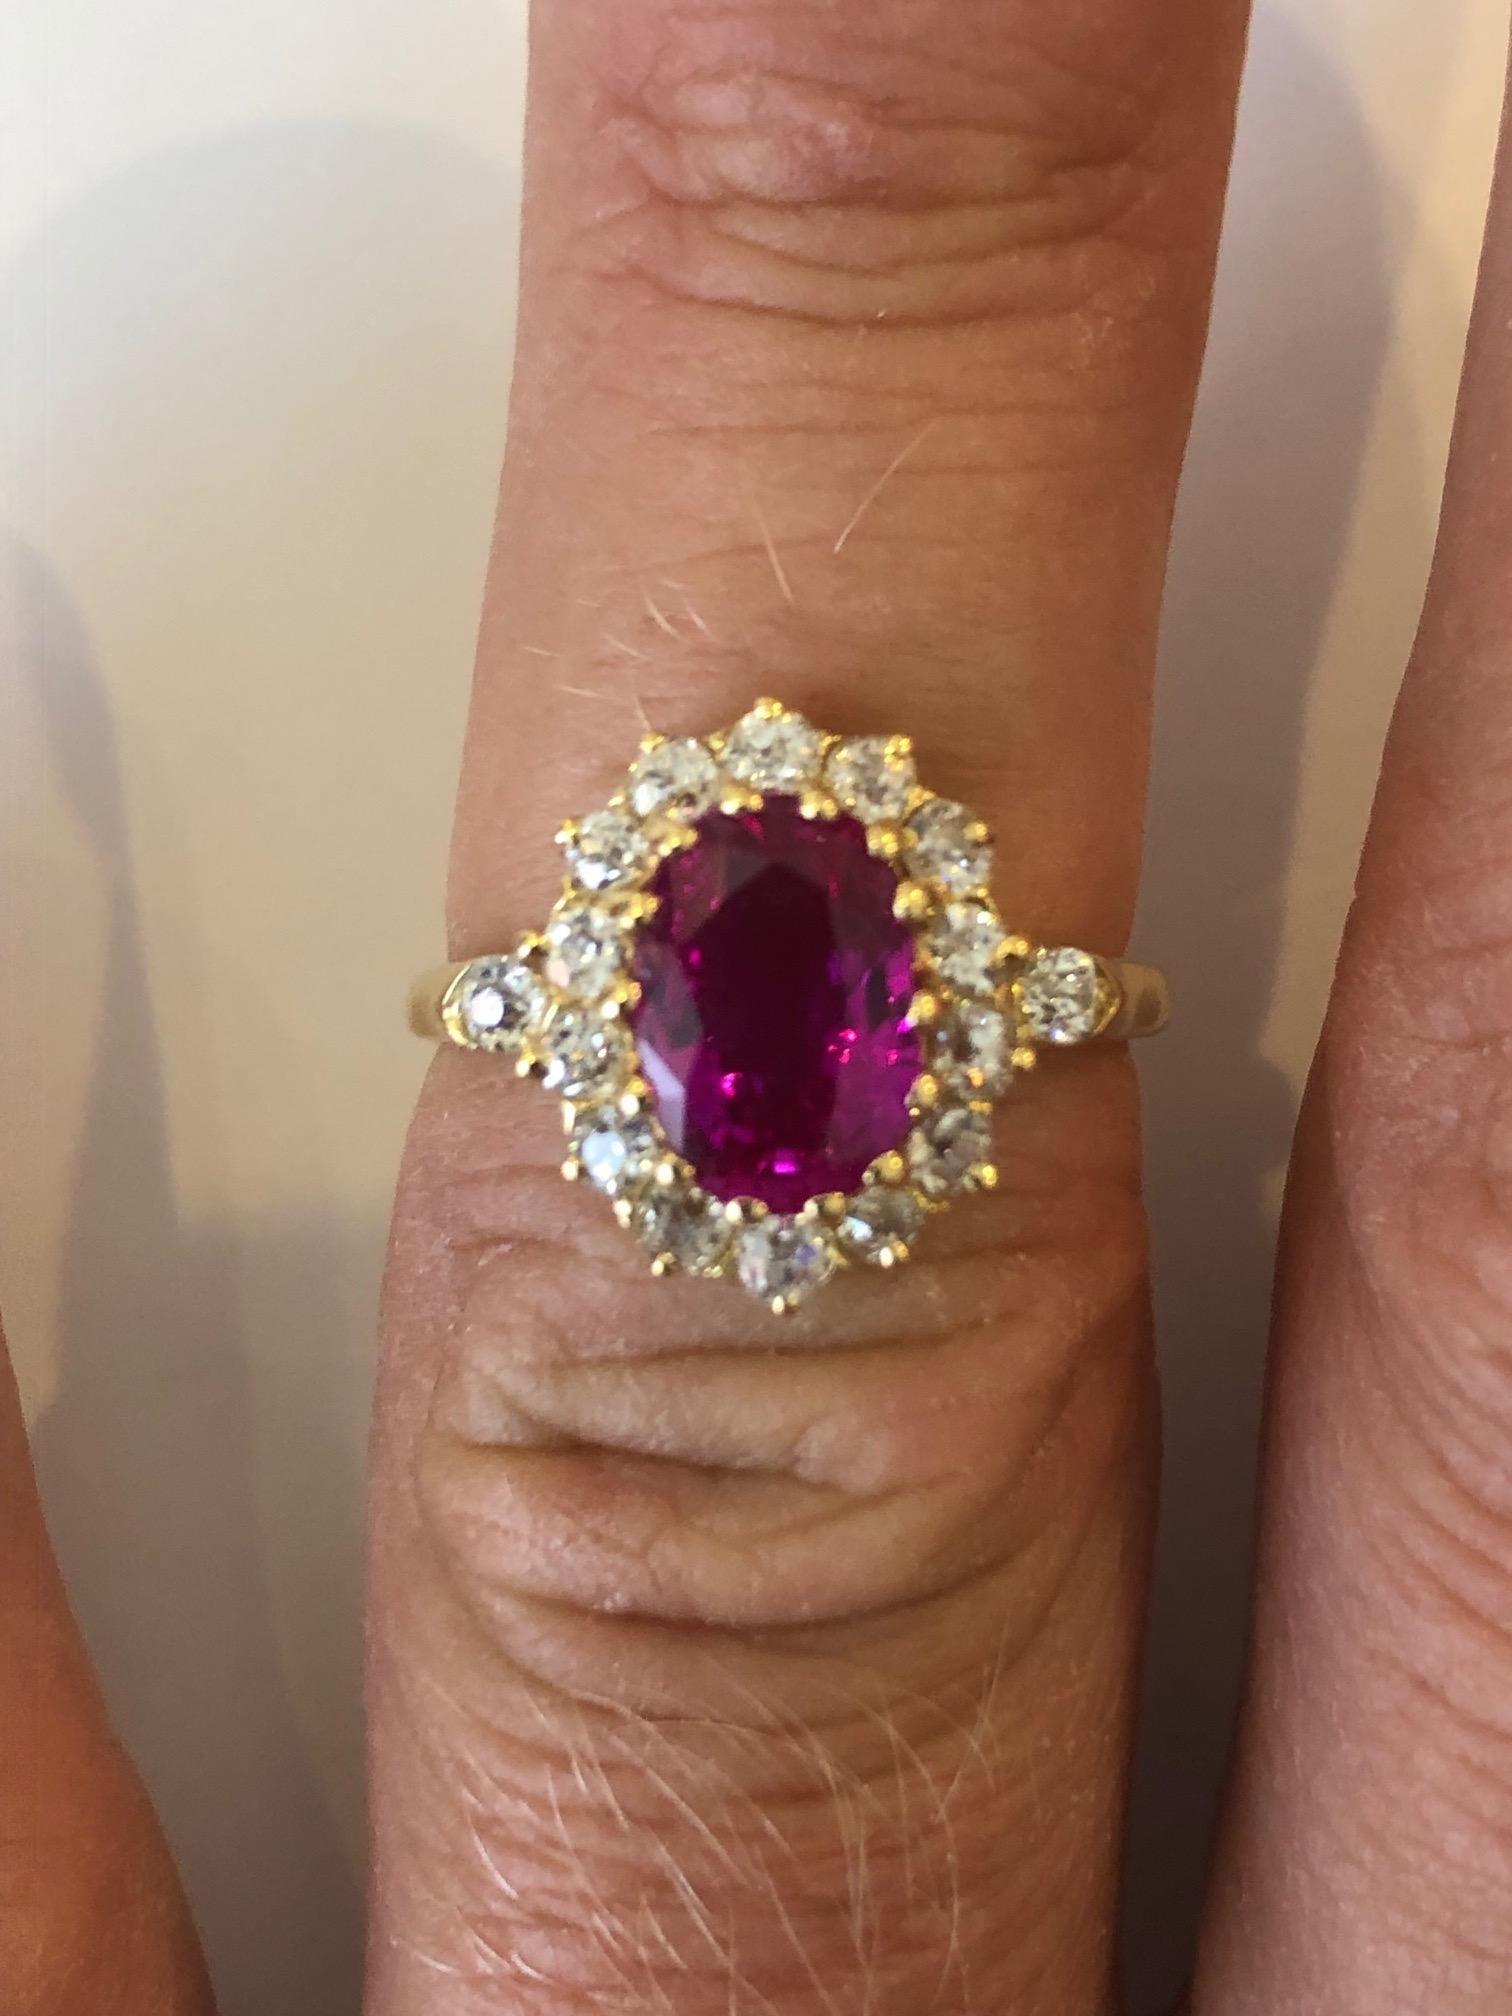 Antique Ruby and Diamond Cluster With a 2 carat Certificated Burma ruby
This antique cluster diamond cluster ring centres a 2 carat unheated Burmese ruby which has been certificated by GCS Laboratory. The ruby, which is of excellent colour and